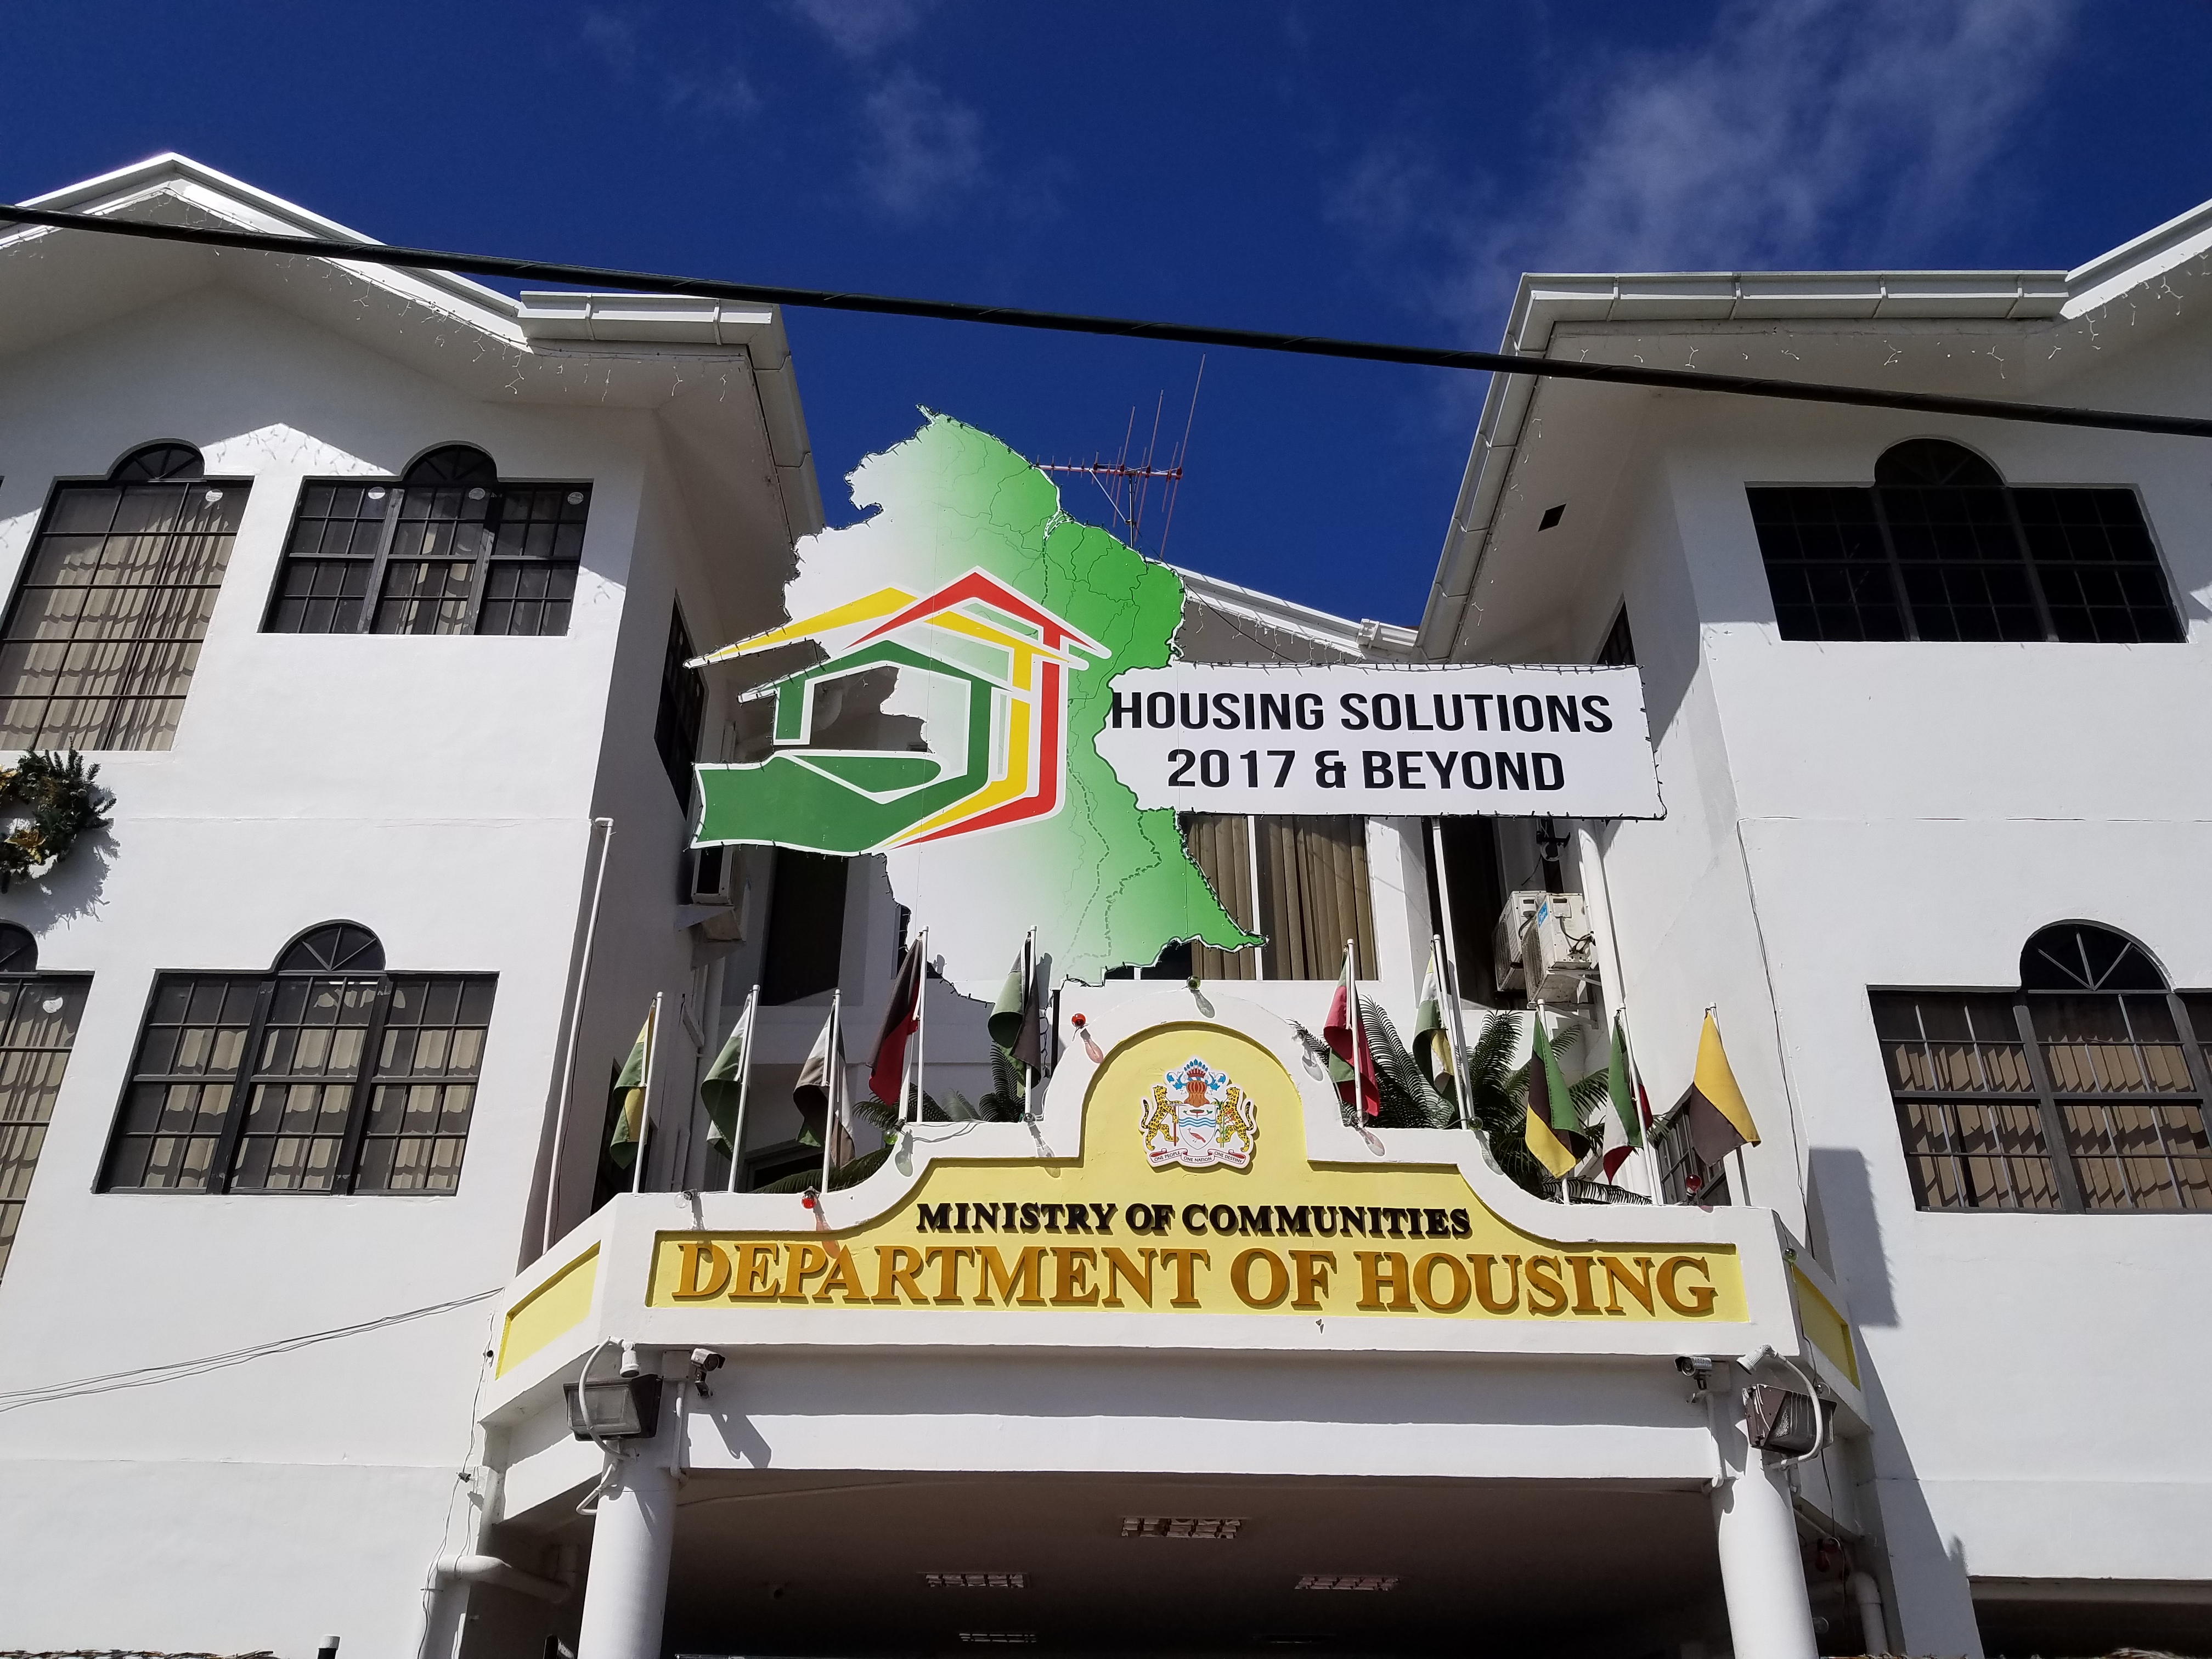 Central Housing and Planning Authority of Guyana